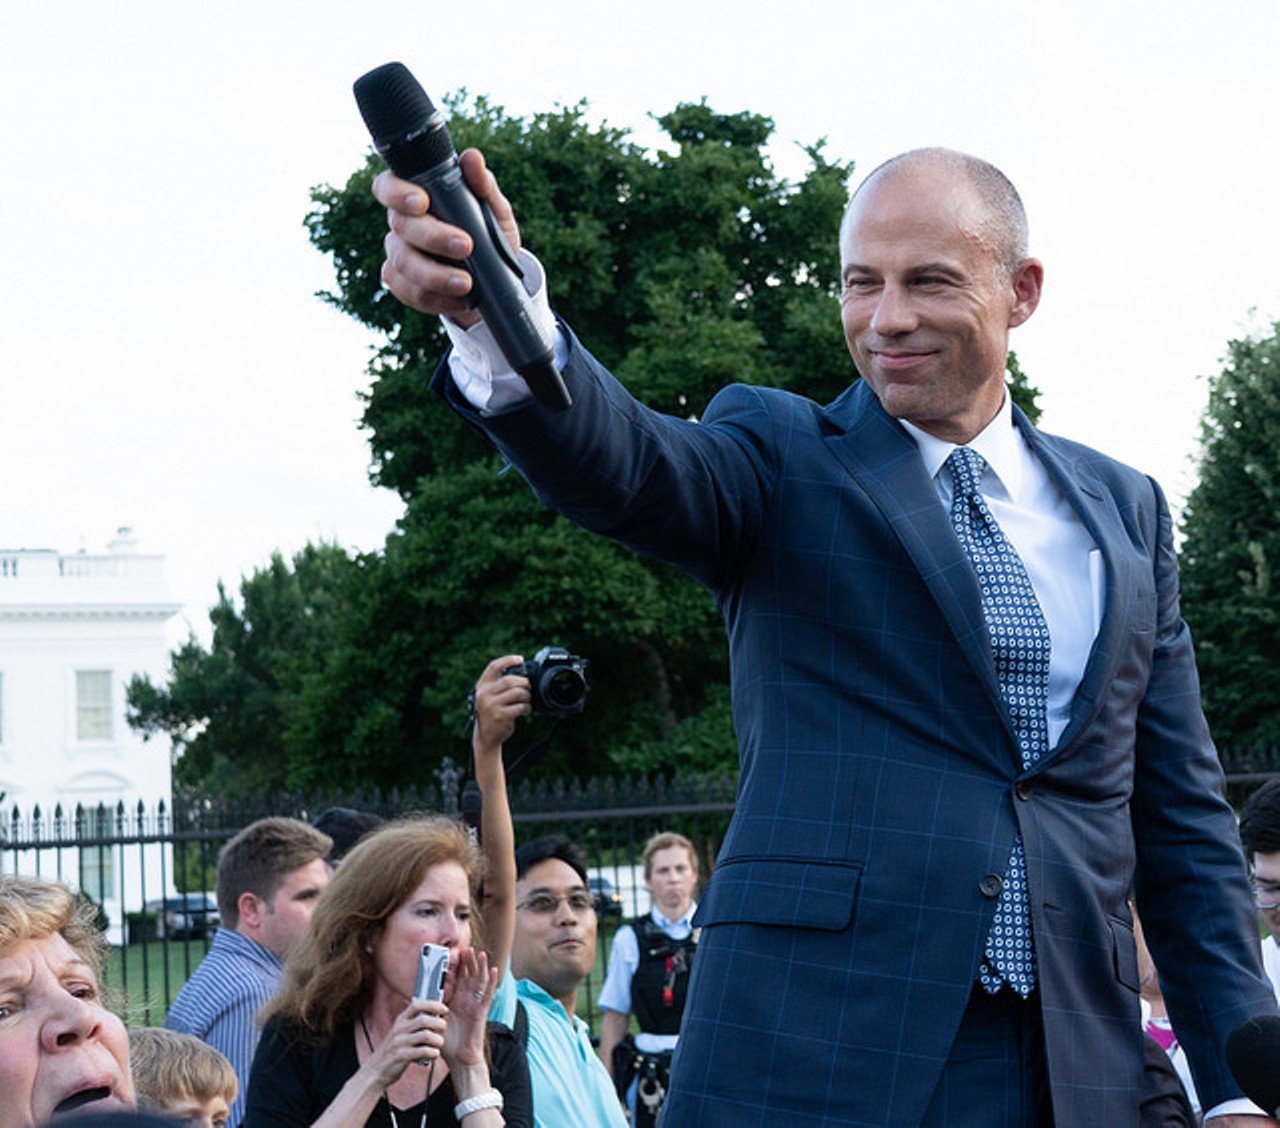 Parkway Central High School 
Michael Avenatti  
Disgraced former attorney 
Remember when Michael Avenatti wanted to bring down Donald Trump, and maybe even be president of the whole damn country? Instead, Nike brought Avenatti down — and now we find out he was ripping off clients like Stormy Daniels the whole time. Still, if Parkway Central claimed this 1989 graduate on the good days, they need to claim him on the bad ones, too.